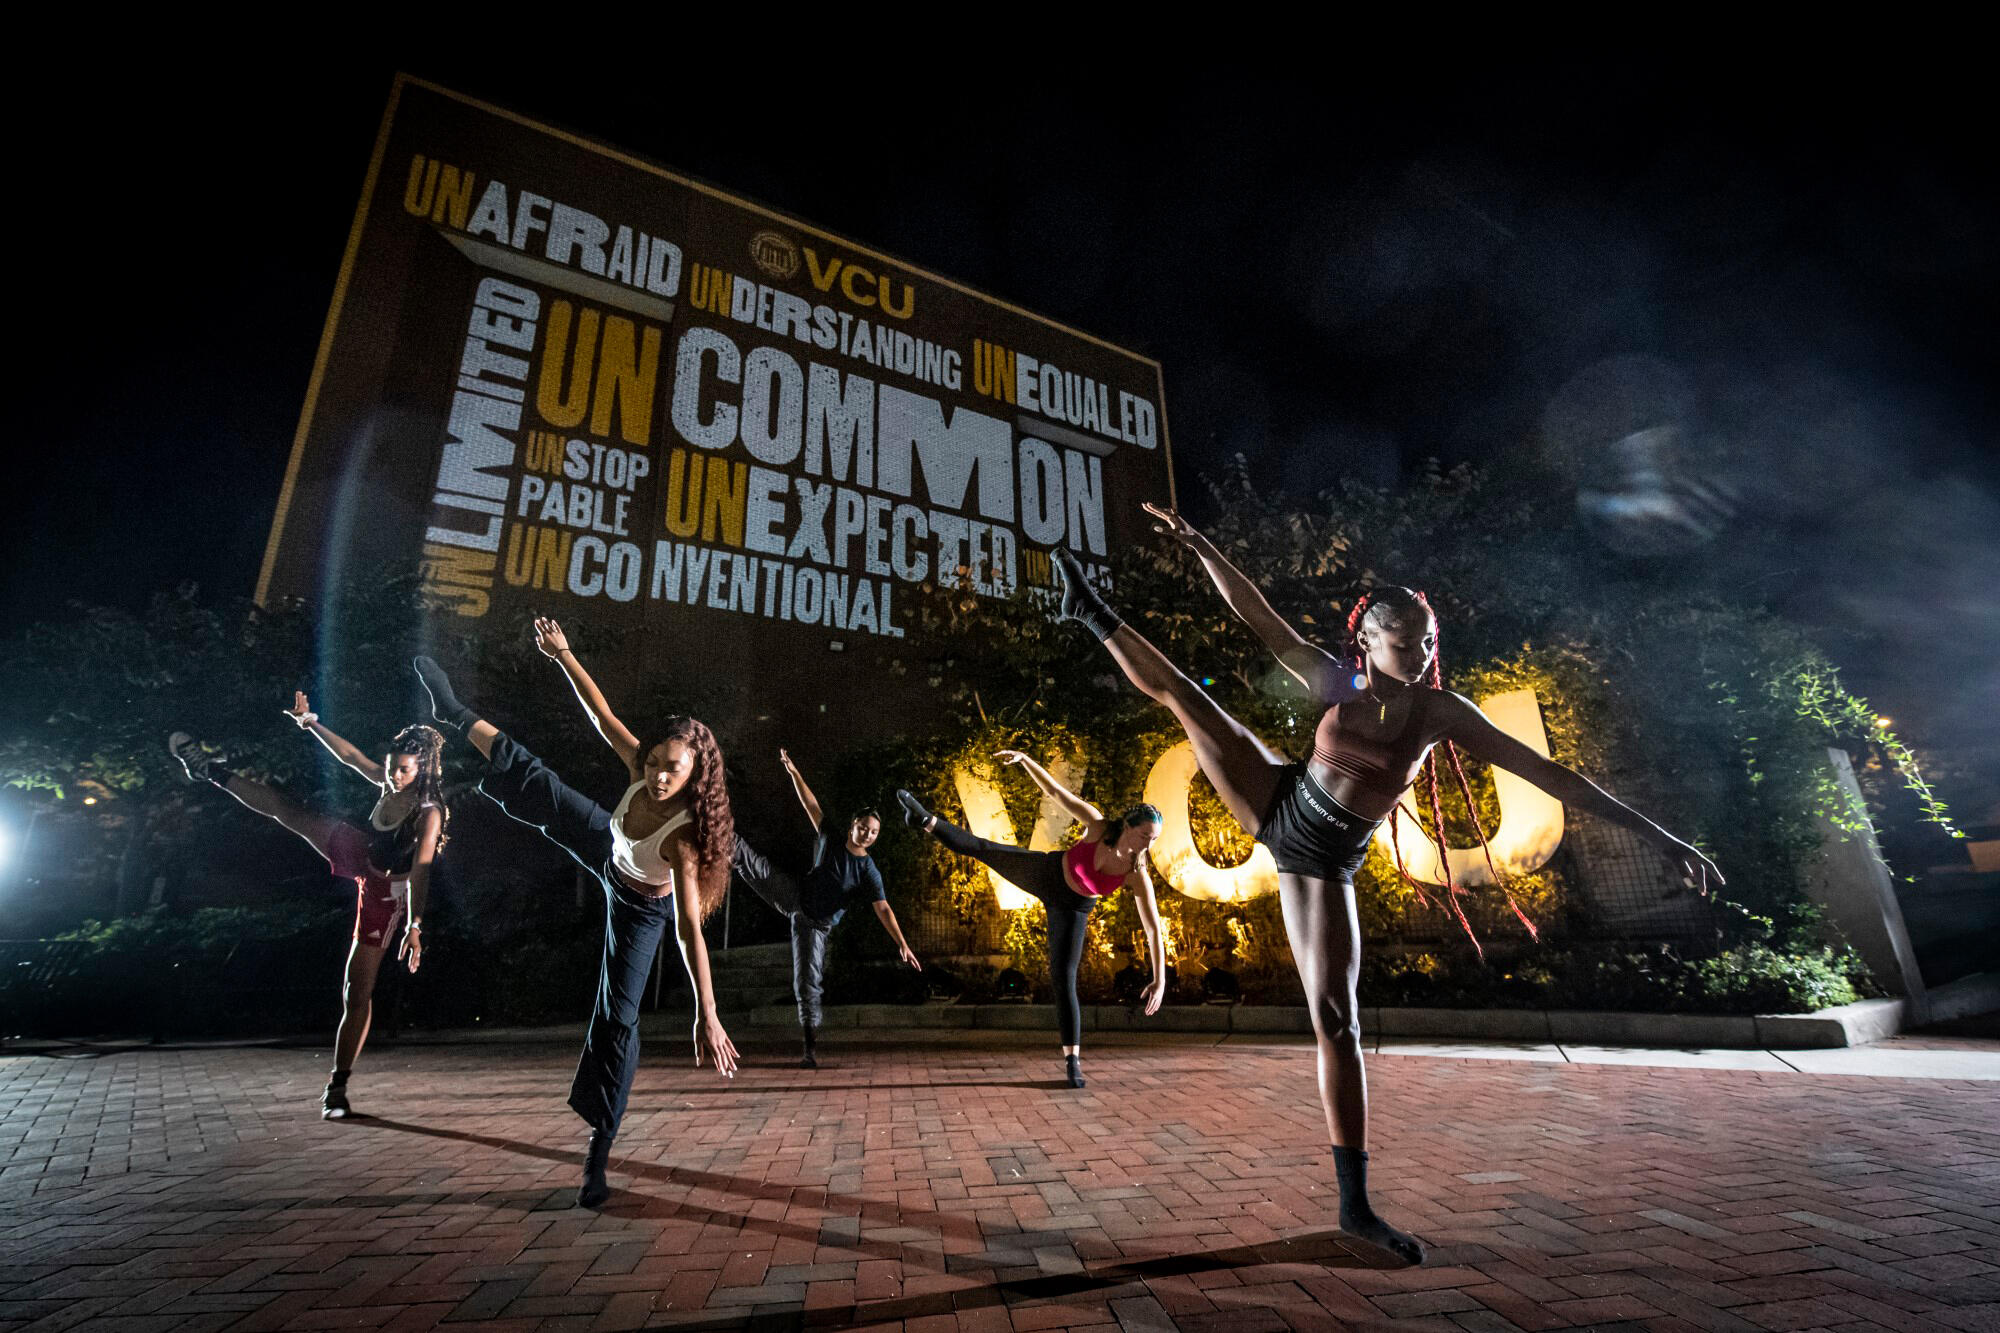 Students participate in a dance performance at night under a wall lit with an artistic word cloud of words that fit with the uncommon experience VCU provides: Unafraid, unlimited, understanding, unequaled, uncommon, unexpected, unstoppable and unconventional.